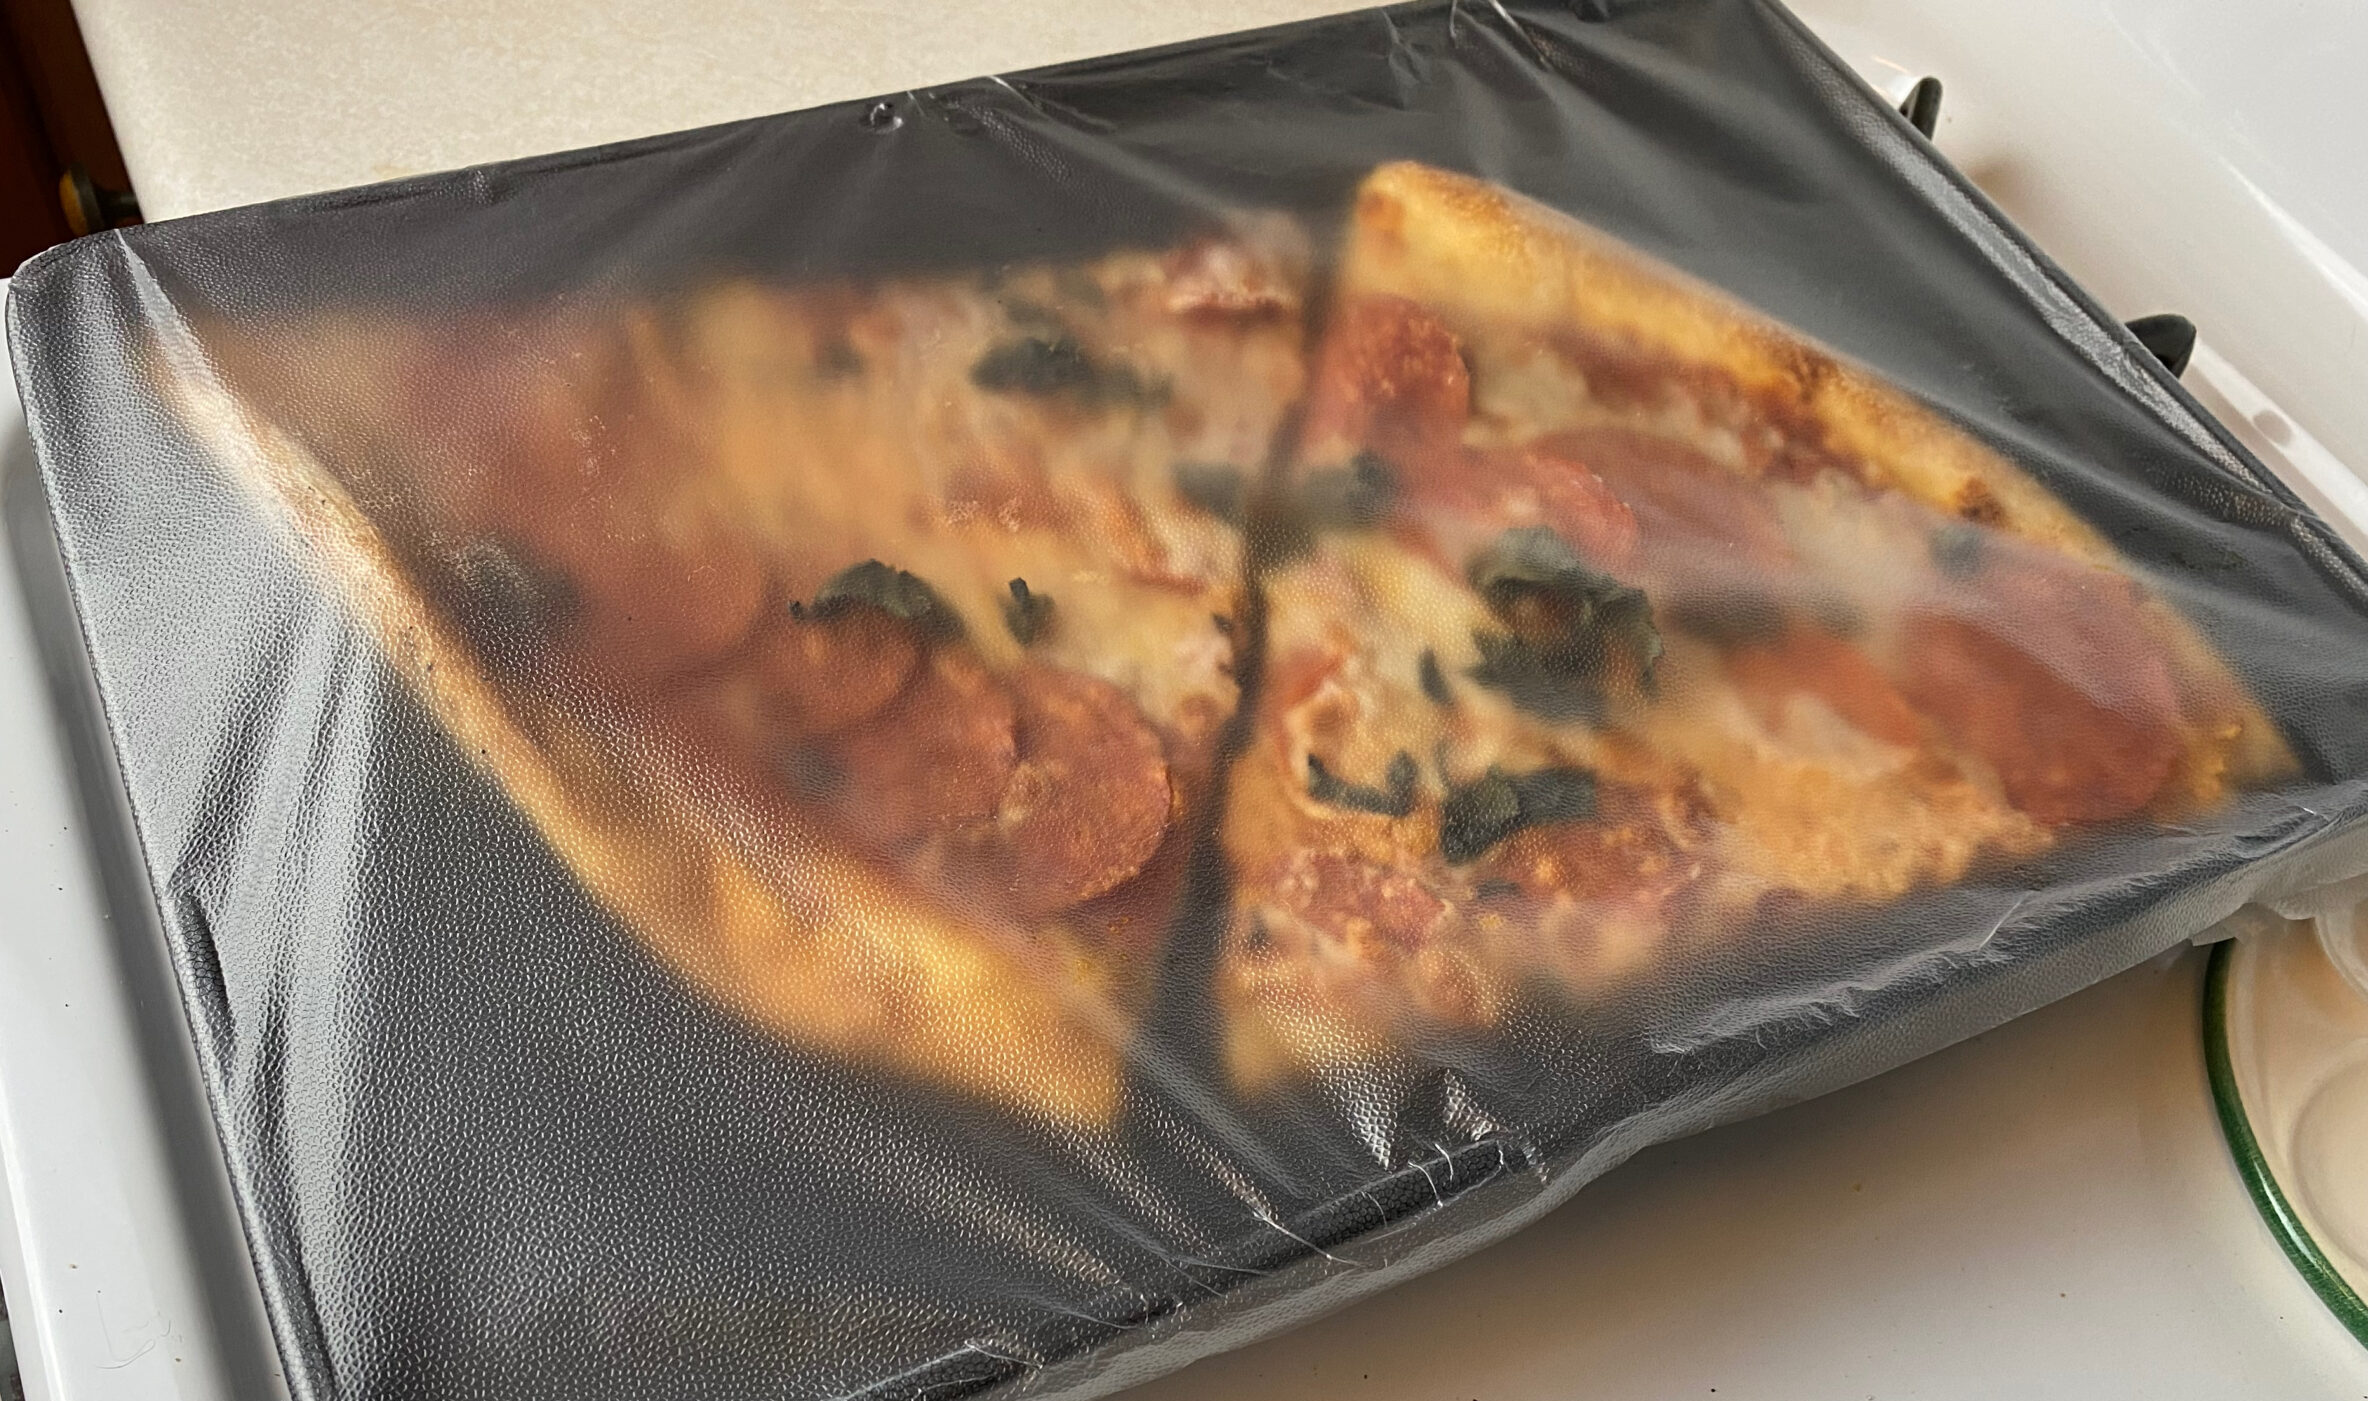 two slices of pizza on a baking pan covered by cling wrap